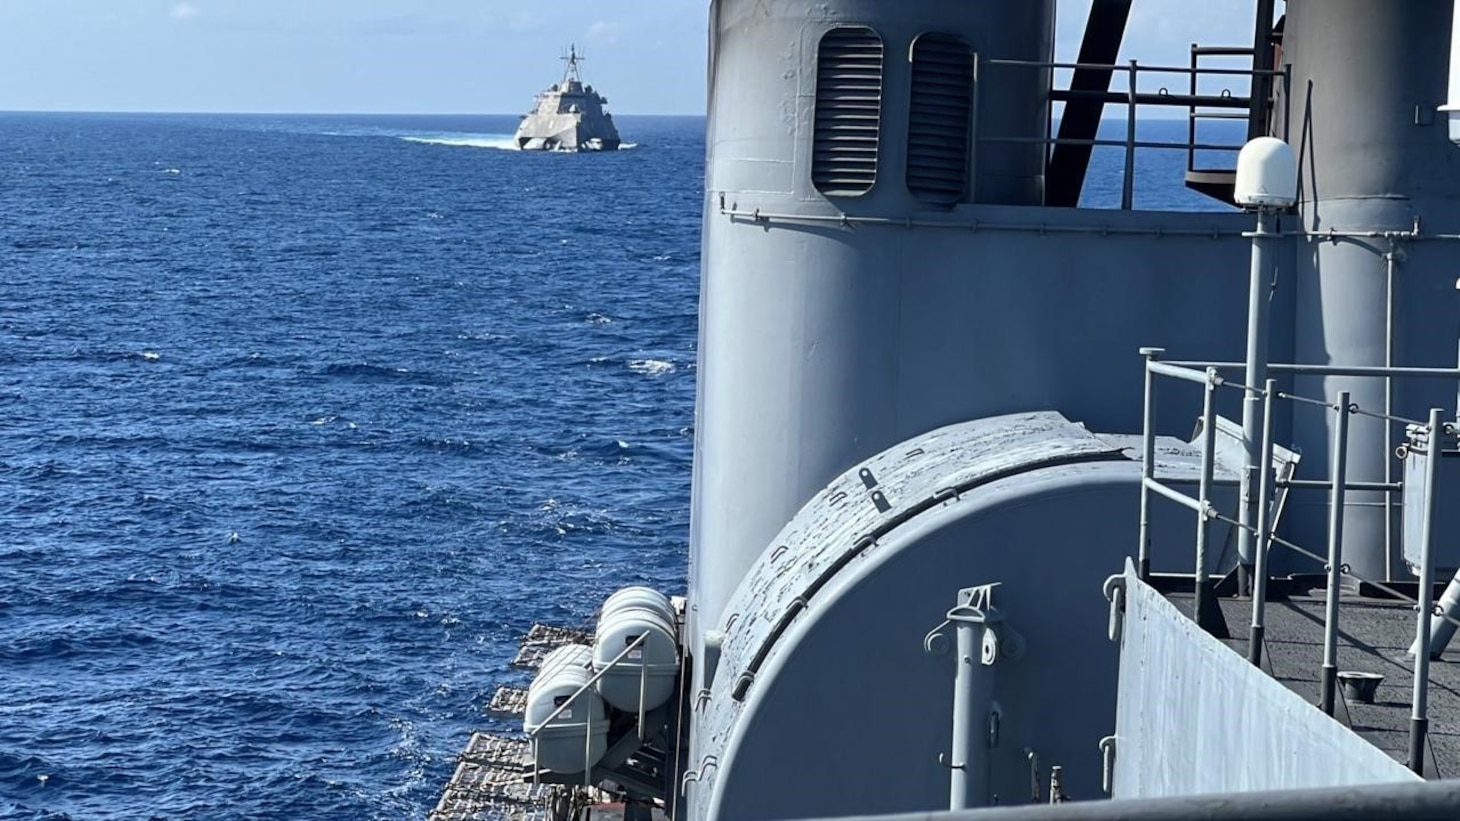 The Philippine Navy ship BRP Gregorio Del Pilar (PS-15) sails alongside the Independence-variant littoral combat ship USS Gabrielle Giffords (LCS 10) during a maritime cooperate activity exercise in the South China Sea Feb. 9.